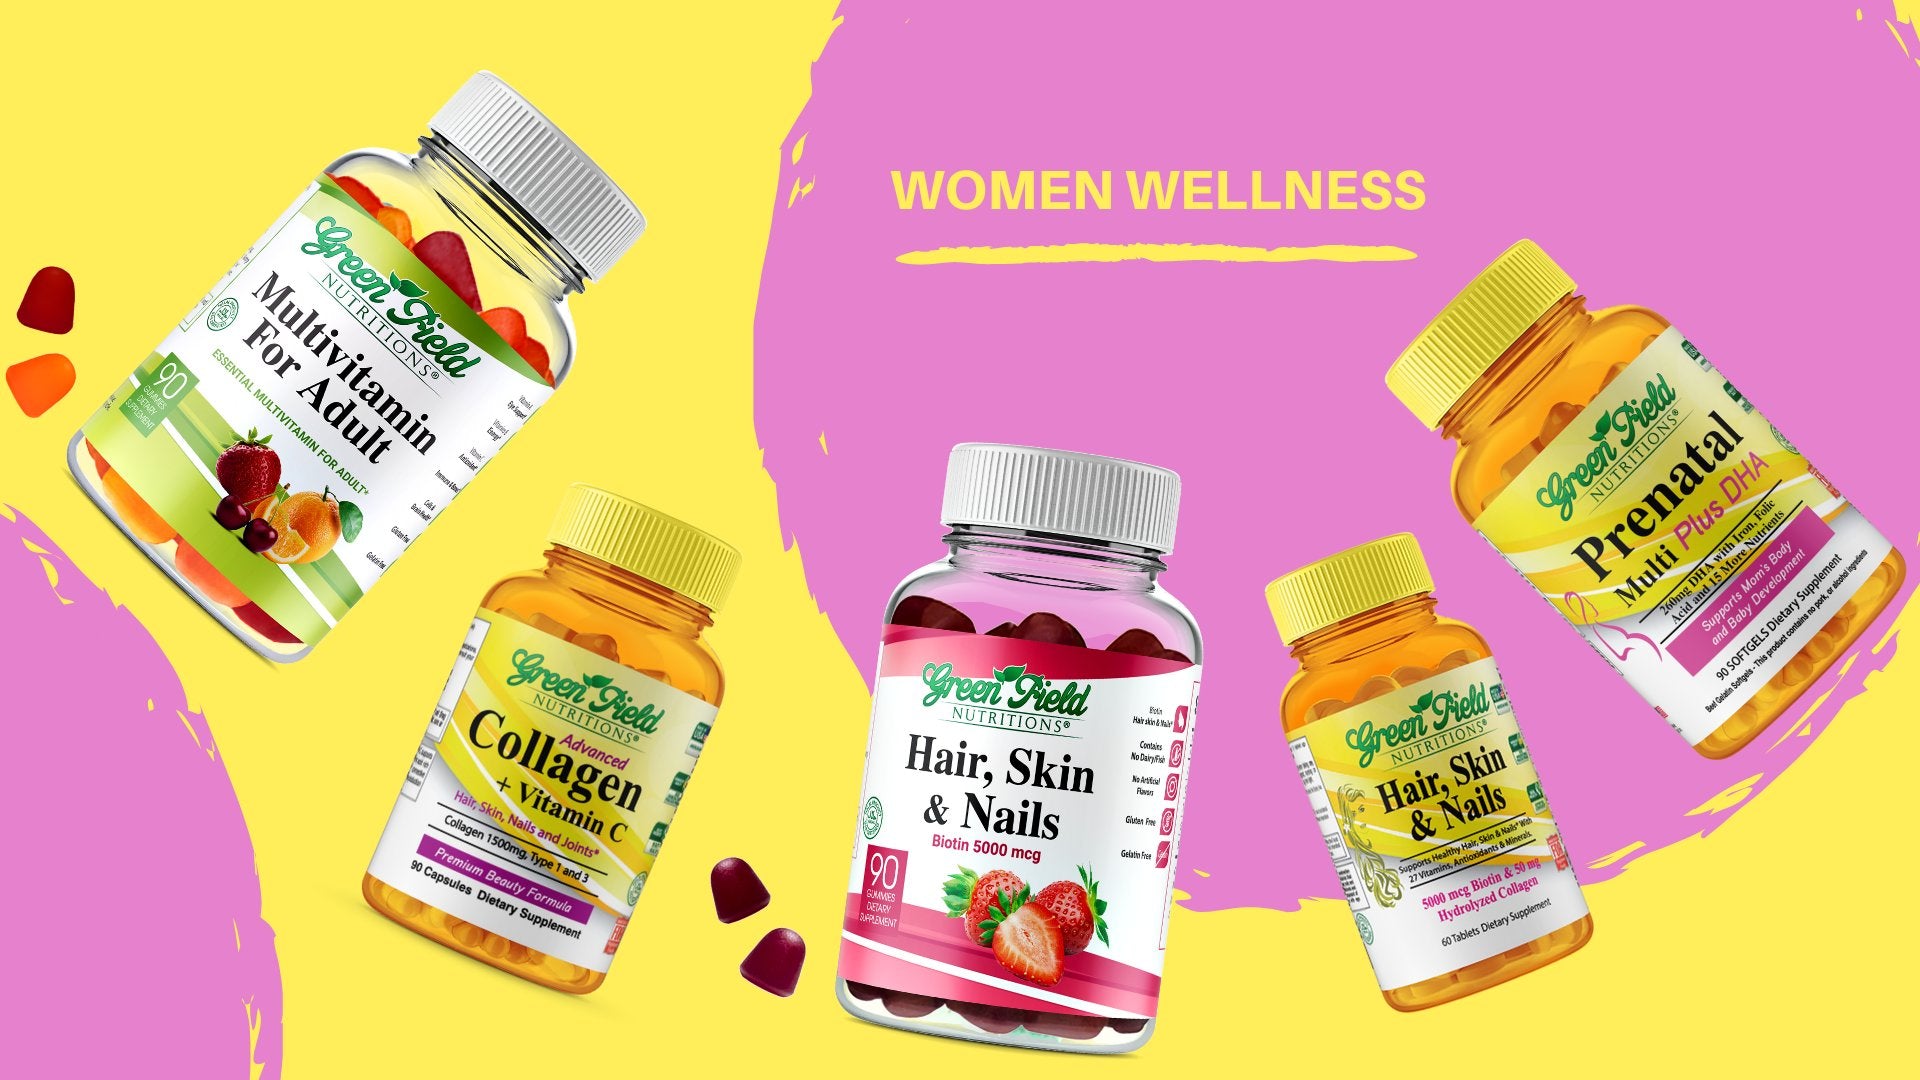 Halal Multivitamin for Women Including Halal multivitamin for Adult Gummies, Halal Biotin for Hair Skin and Nails, Halal Collagen, and Halal Prenatal with DHA and Folic Acid